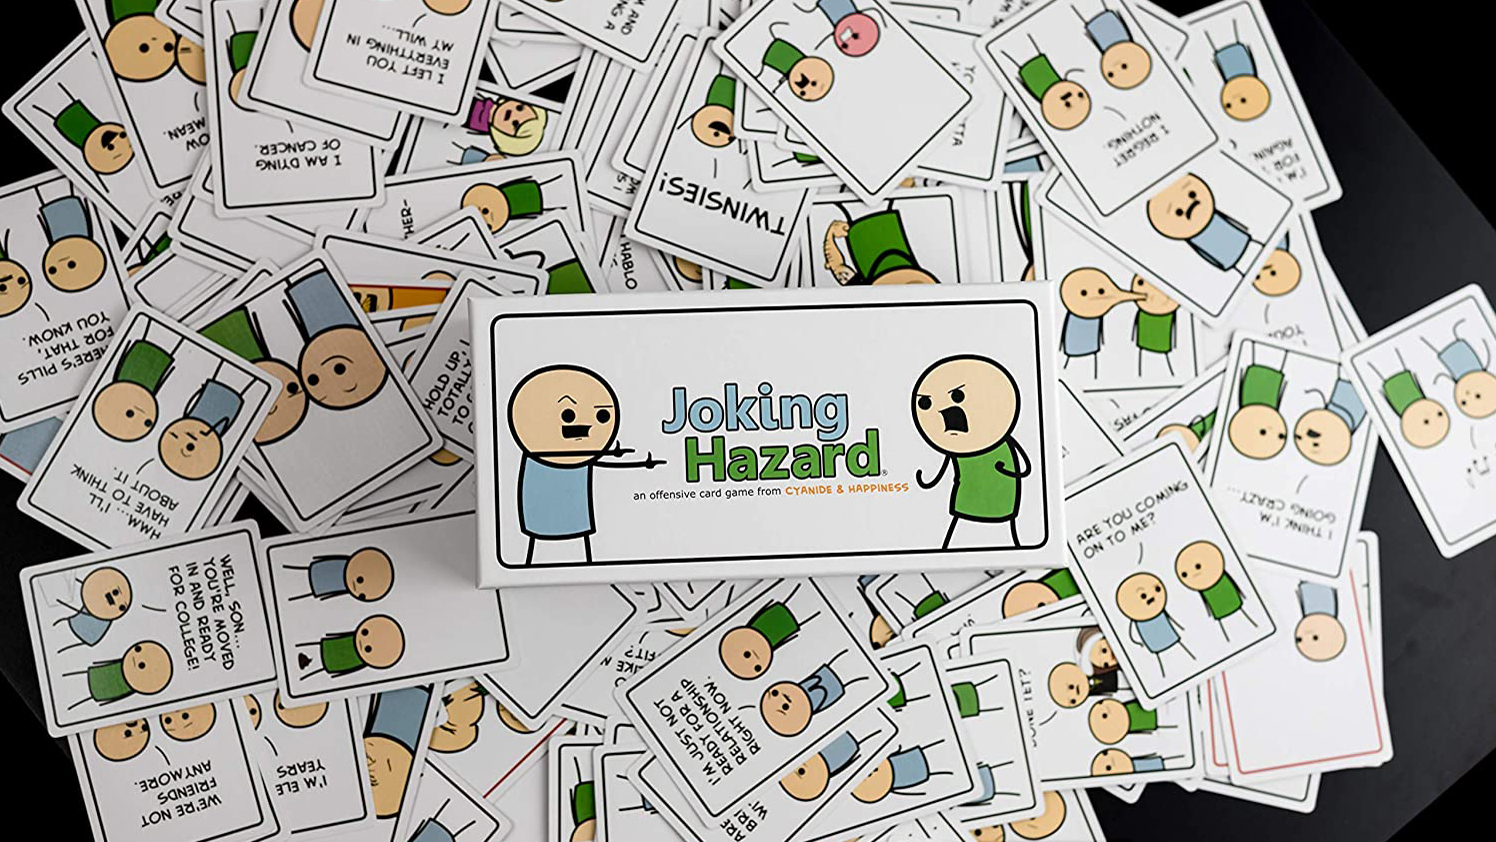 Joking Hazard cards scattered on a table